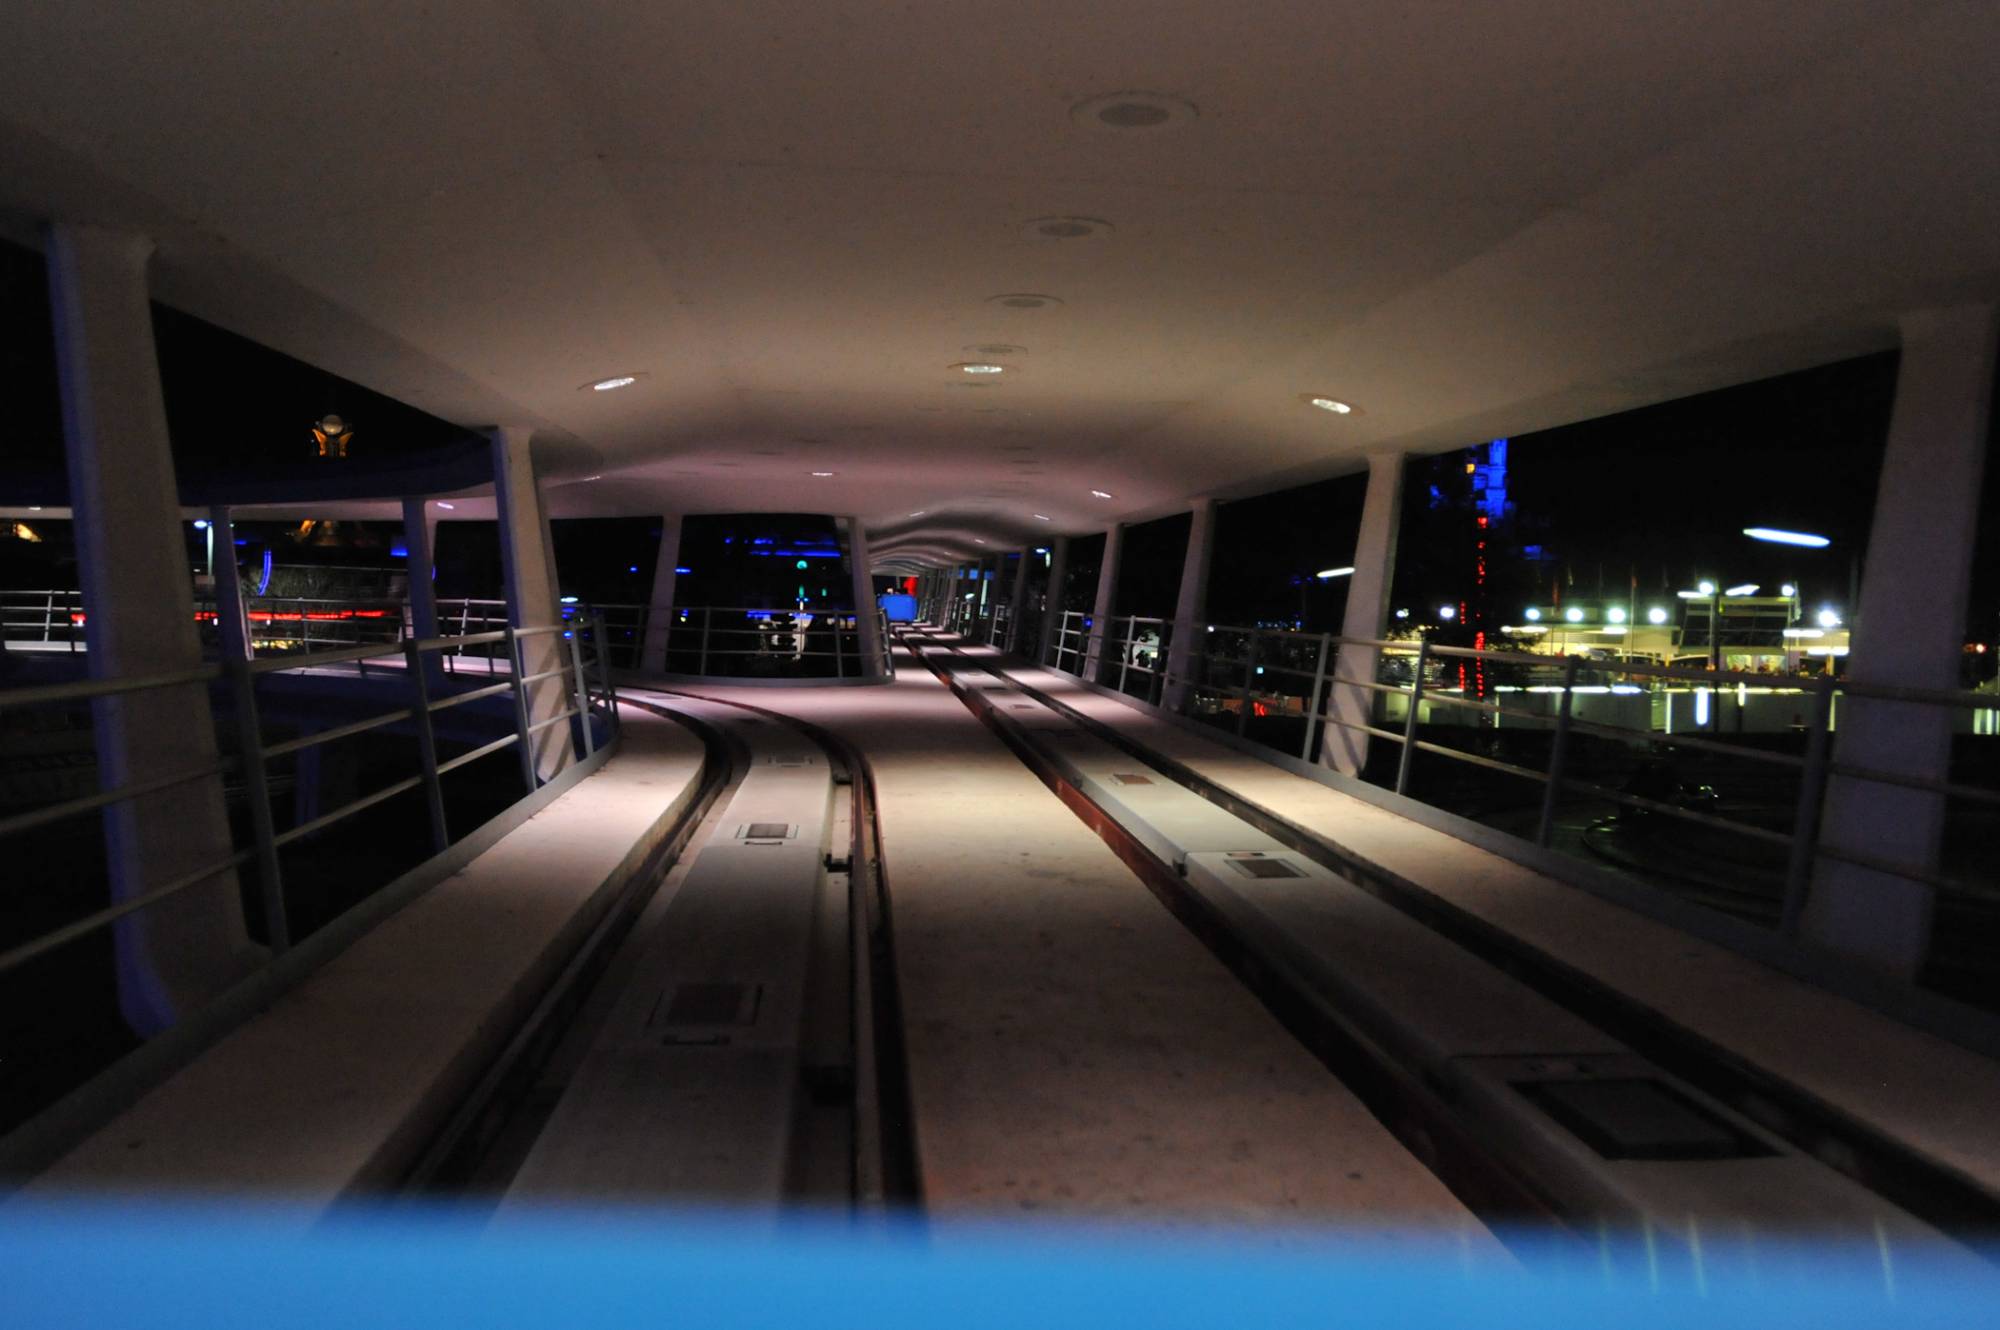 People Mover on track